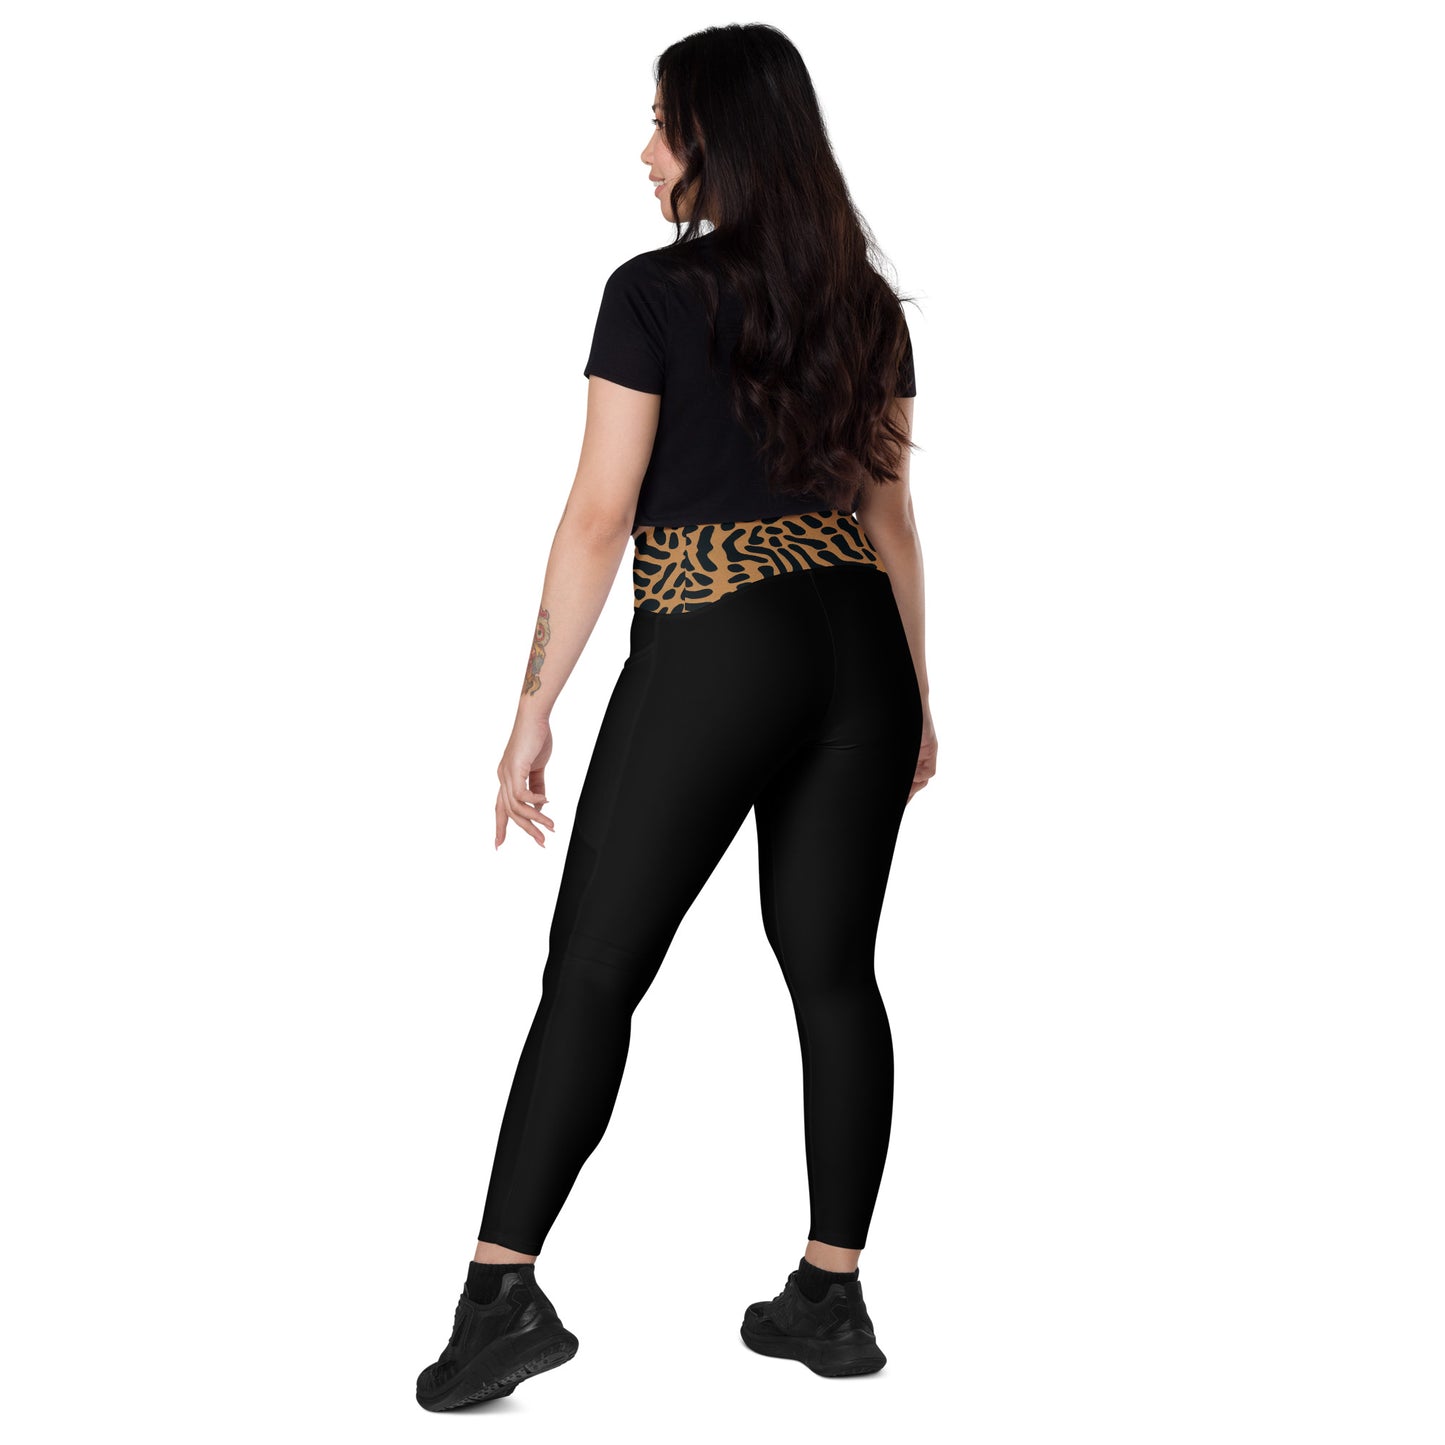 Tiger Print Crossover Leggings with Pockets